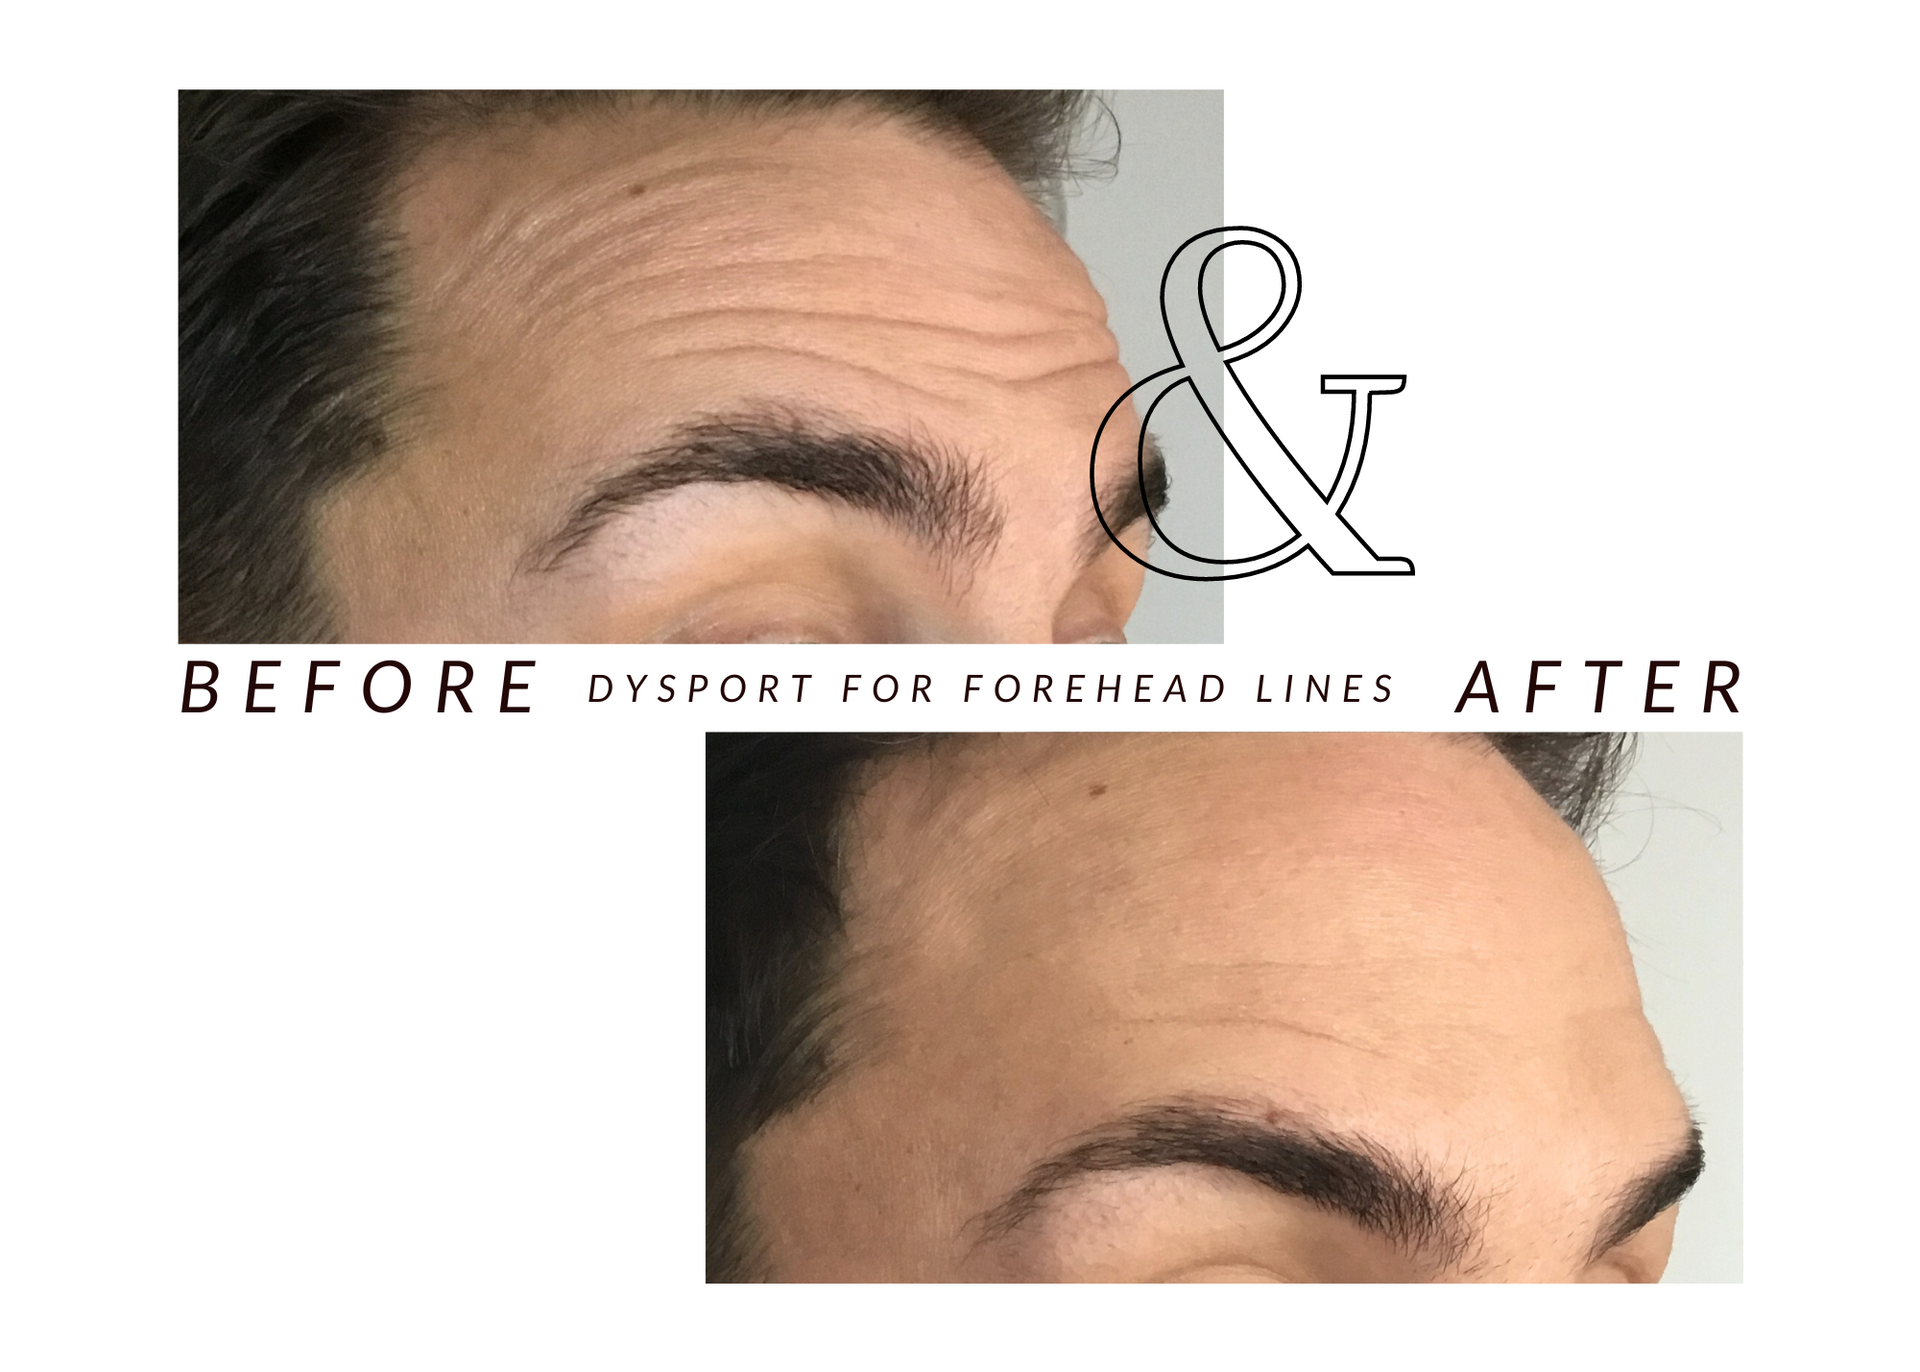 A before and after photo of a man 's forehead lines